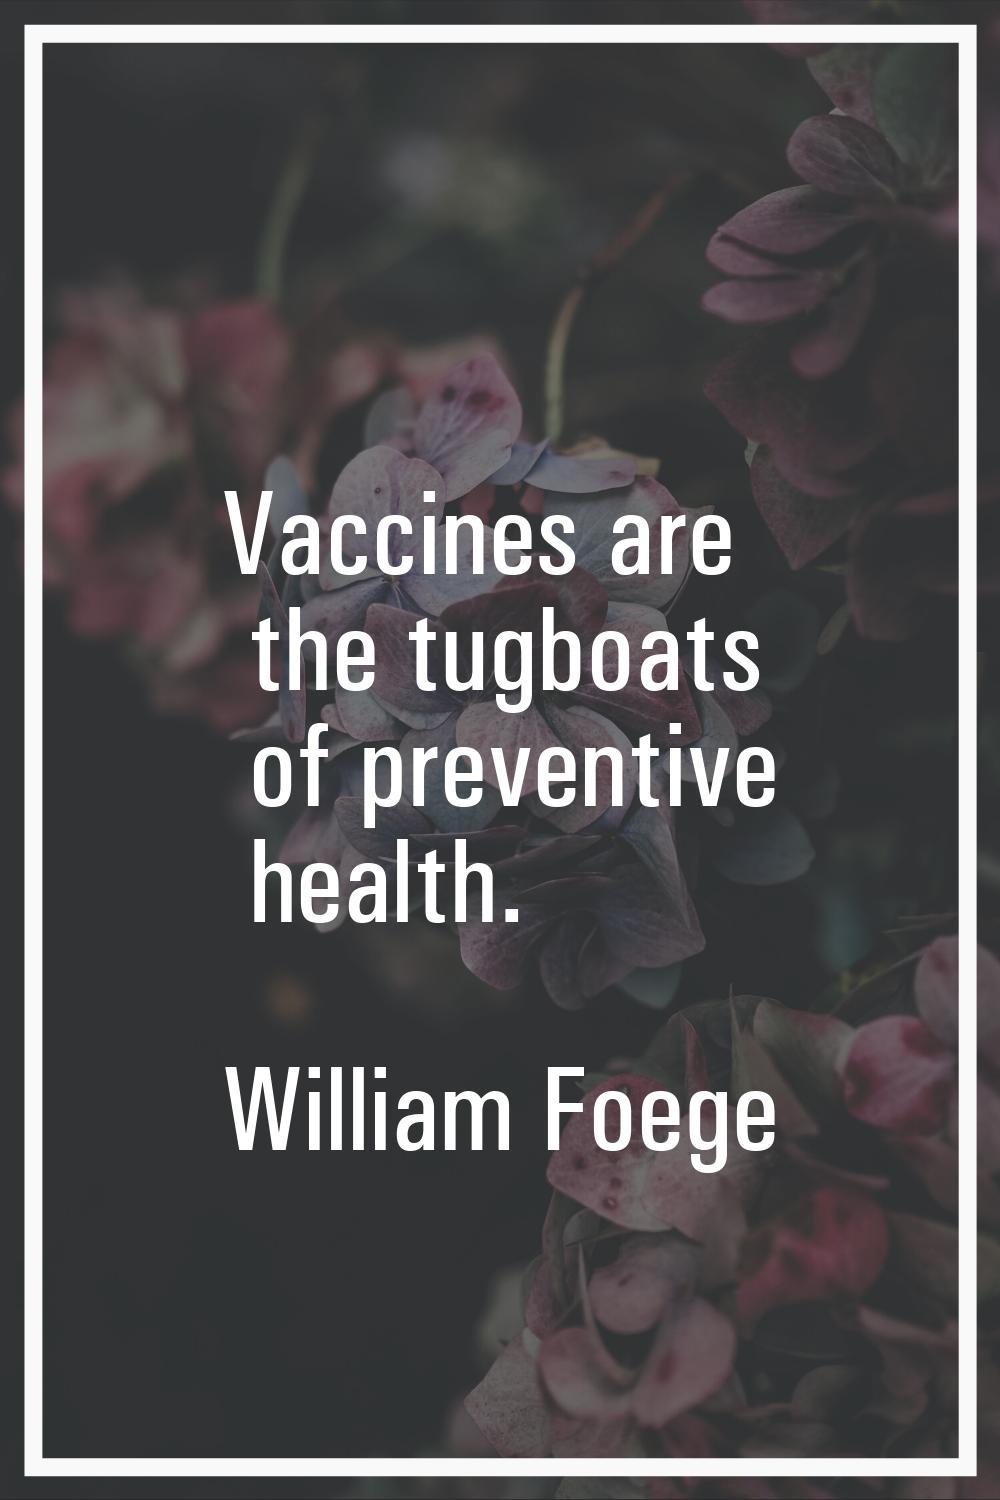 Vaccines are the tugboats of preventive health.